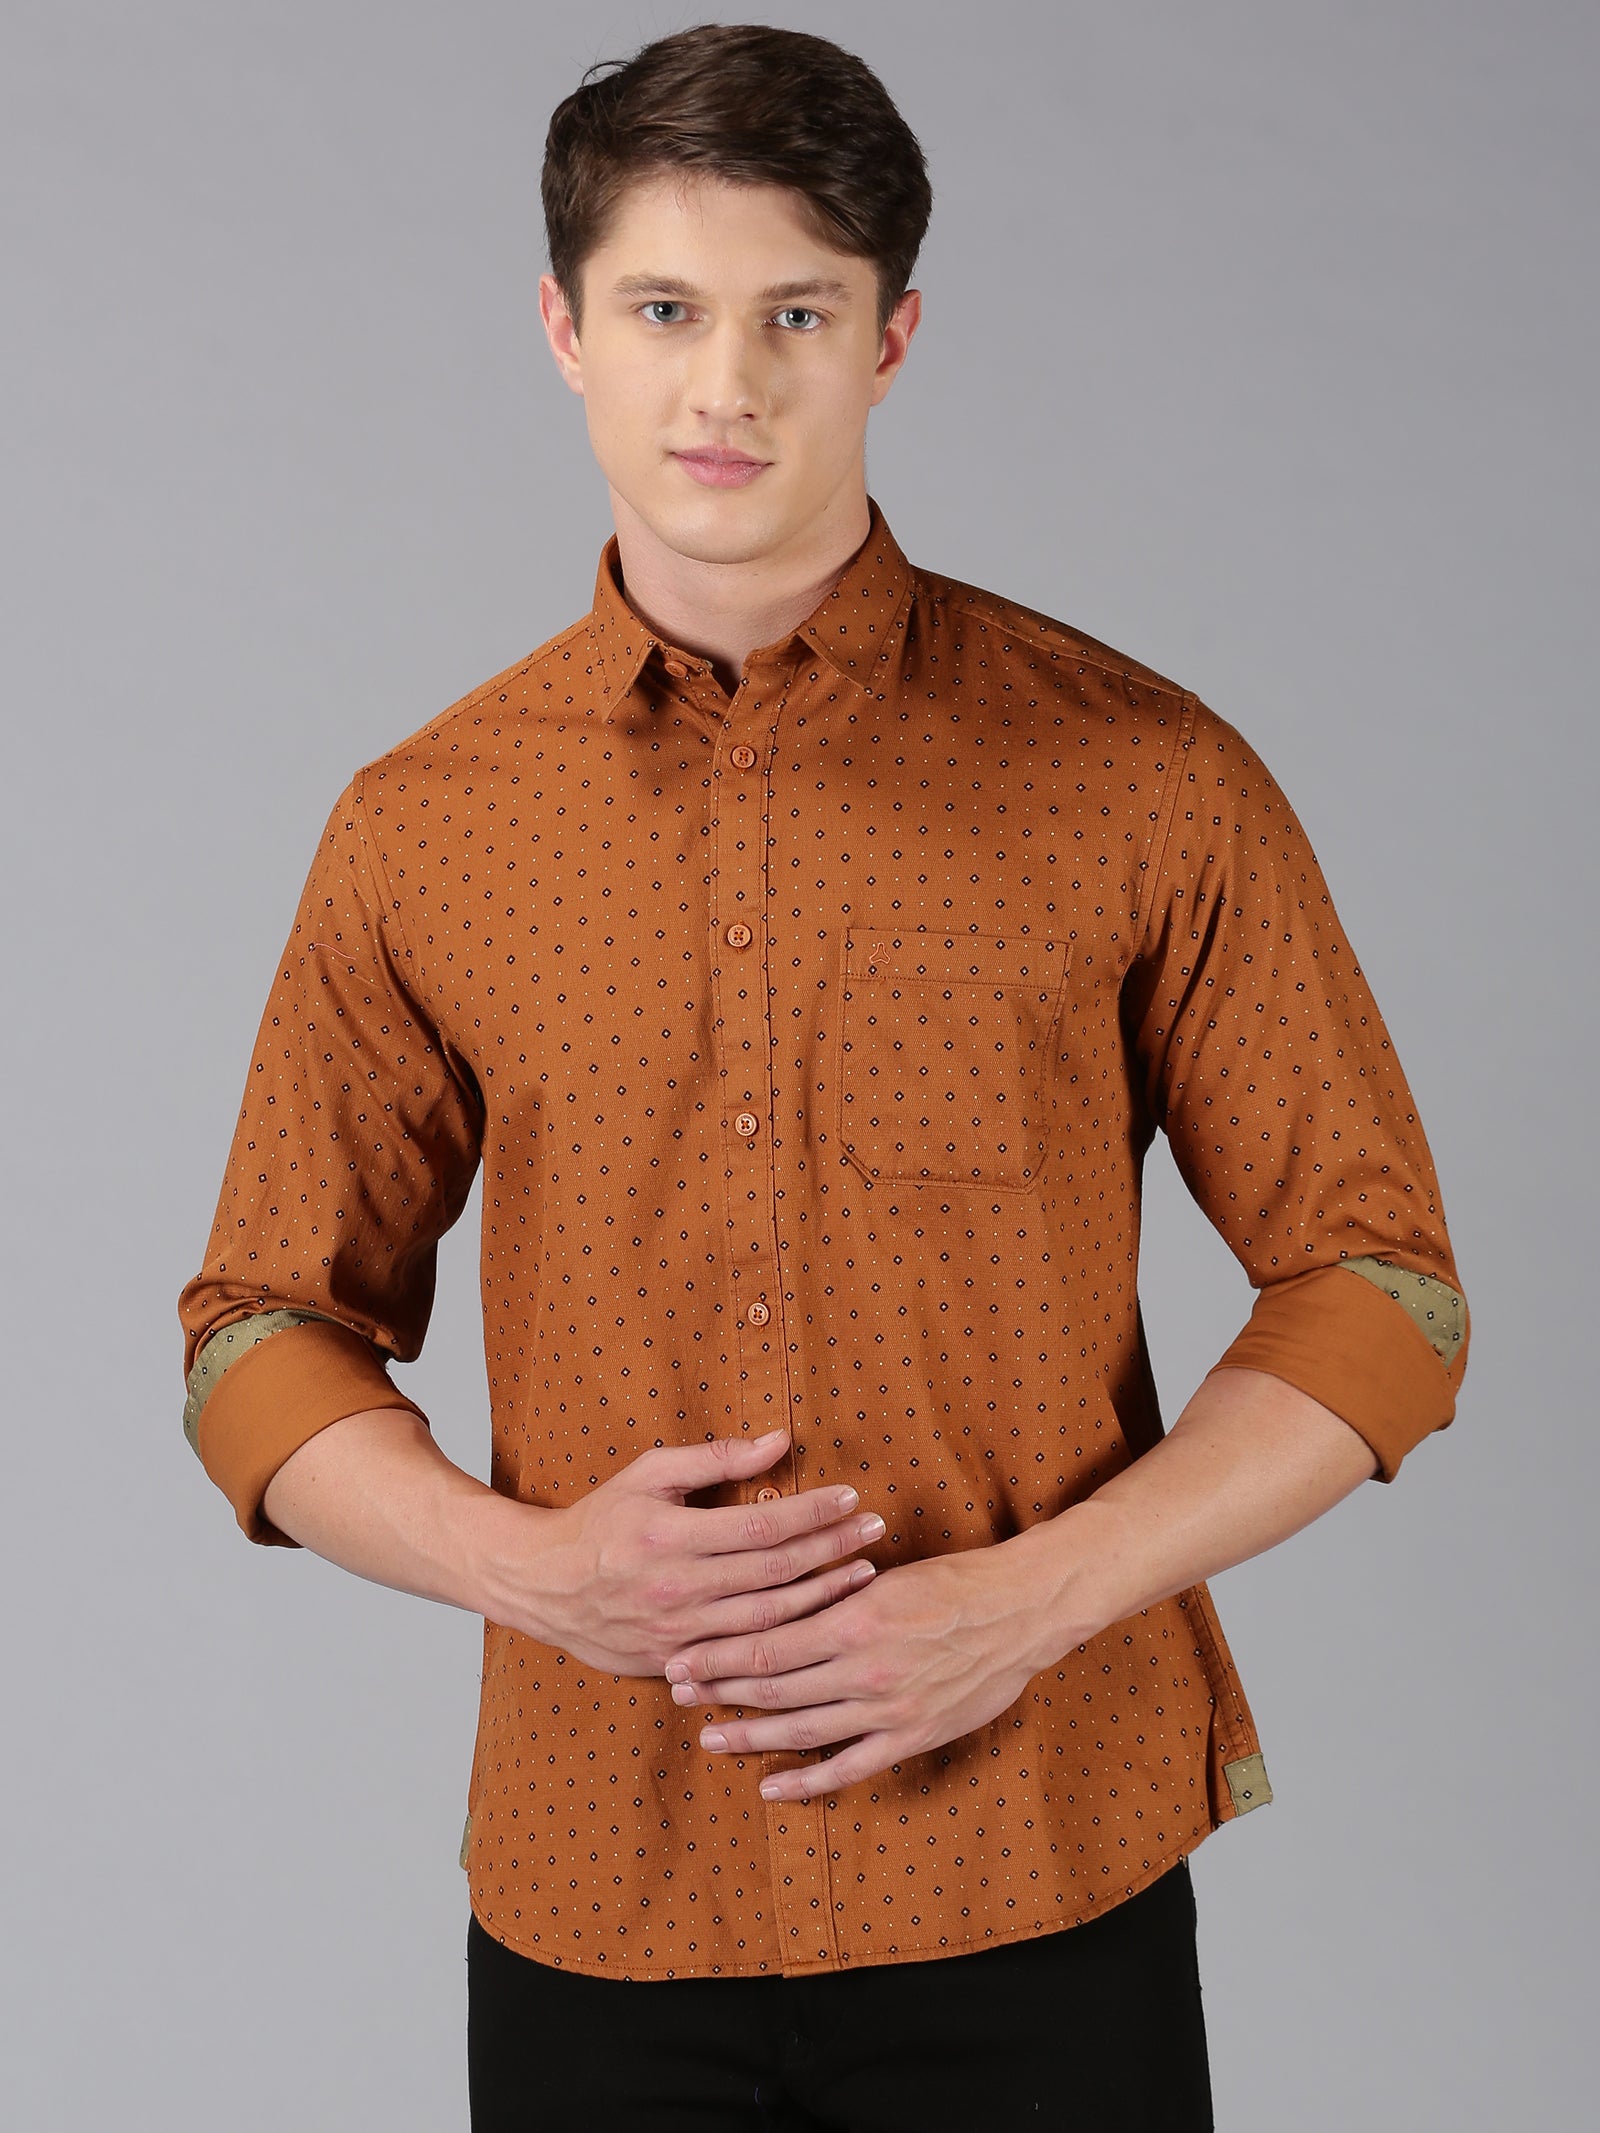 Copper Shirts - Buy Copper Shirts online in India